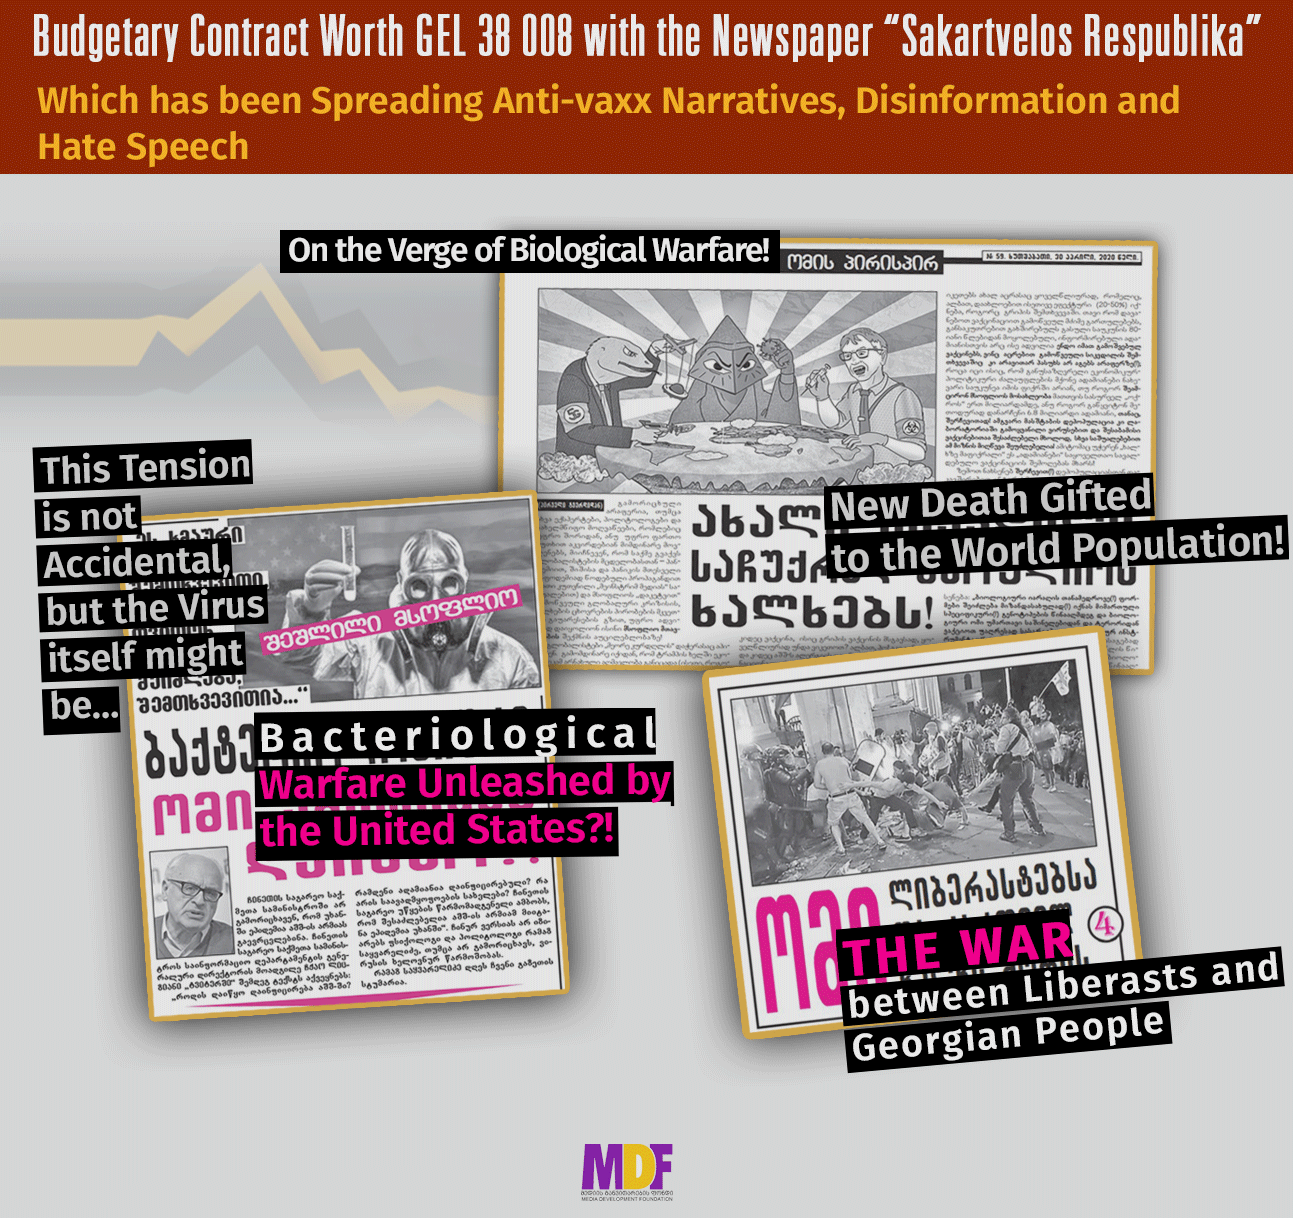 A budgetary contract worth 38,008 GEL with the newspaper “Sakartvelos Respublika” – Which has been Spreading Antivaxx Narratives, Disinformation, and HateSpeech